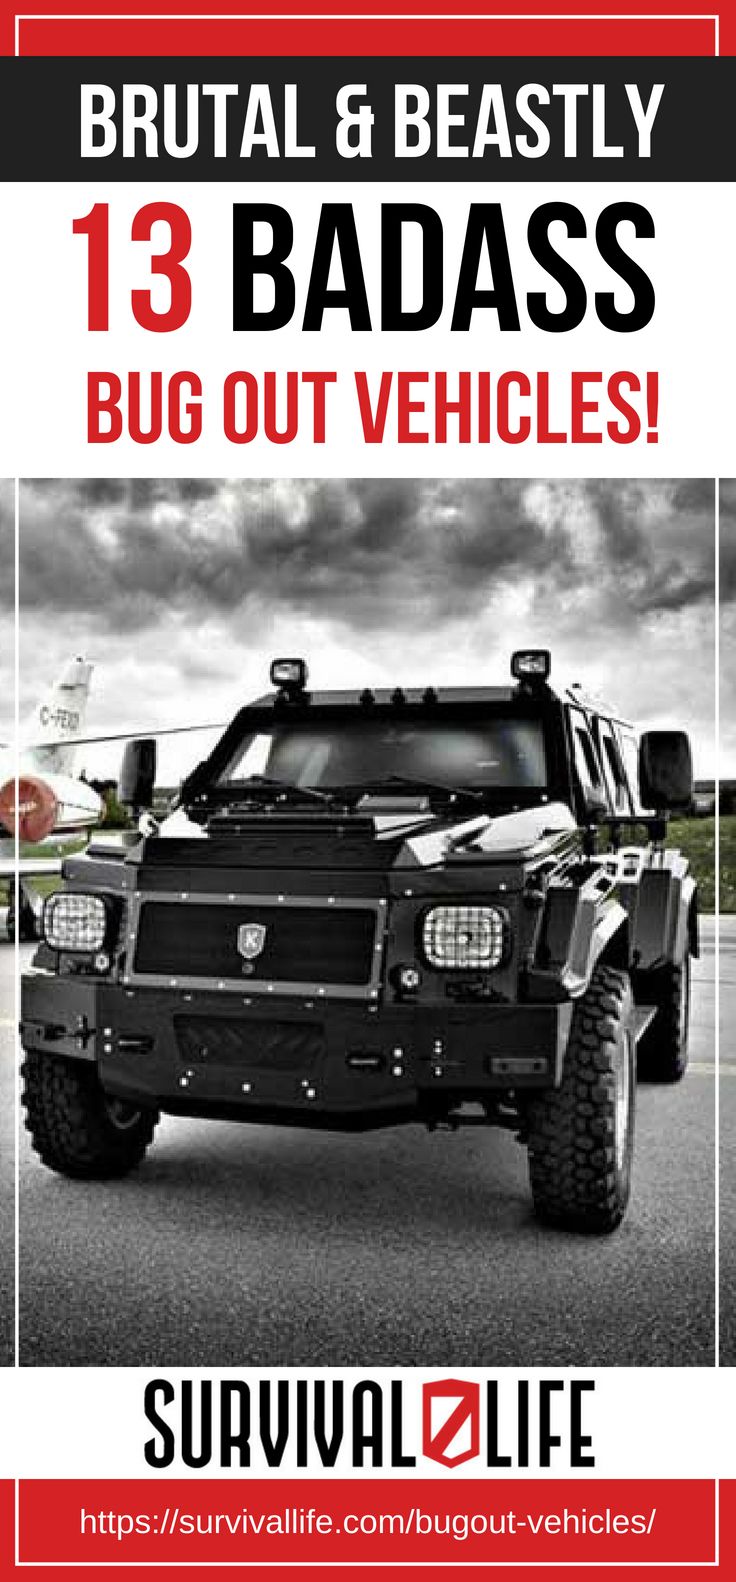 Placard | Brutal and Beastly: 13 BADASS Bug Out Vehicles!